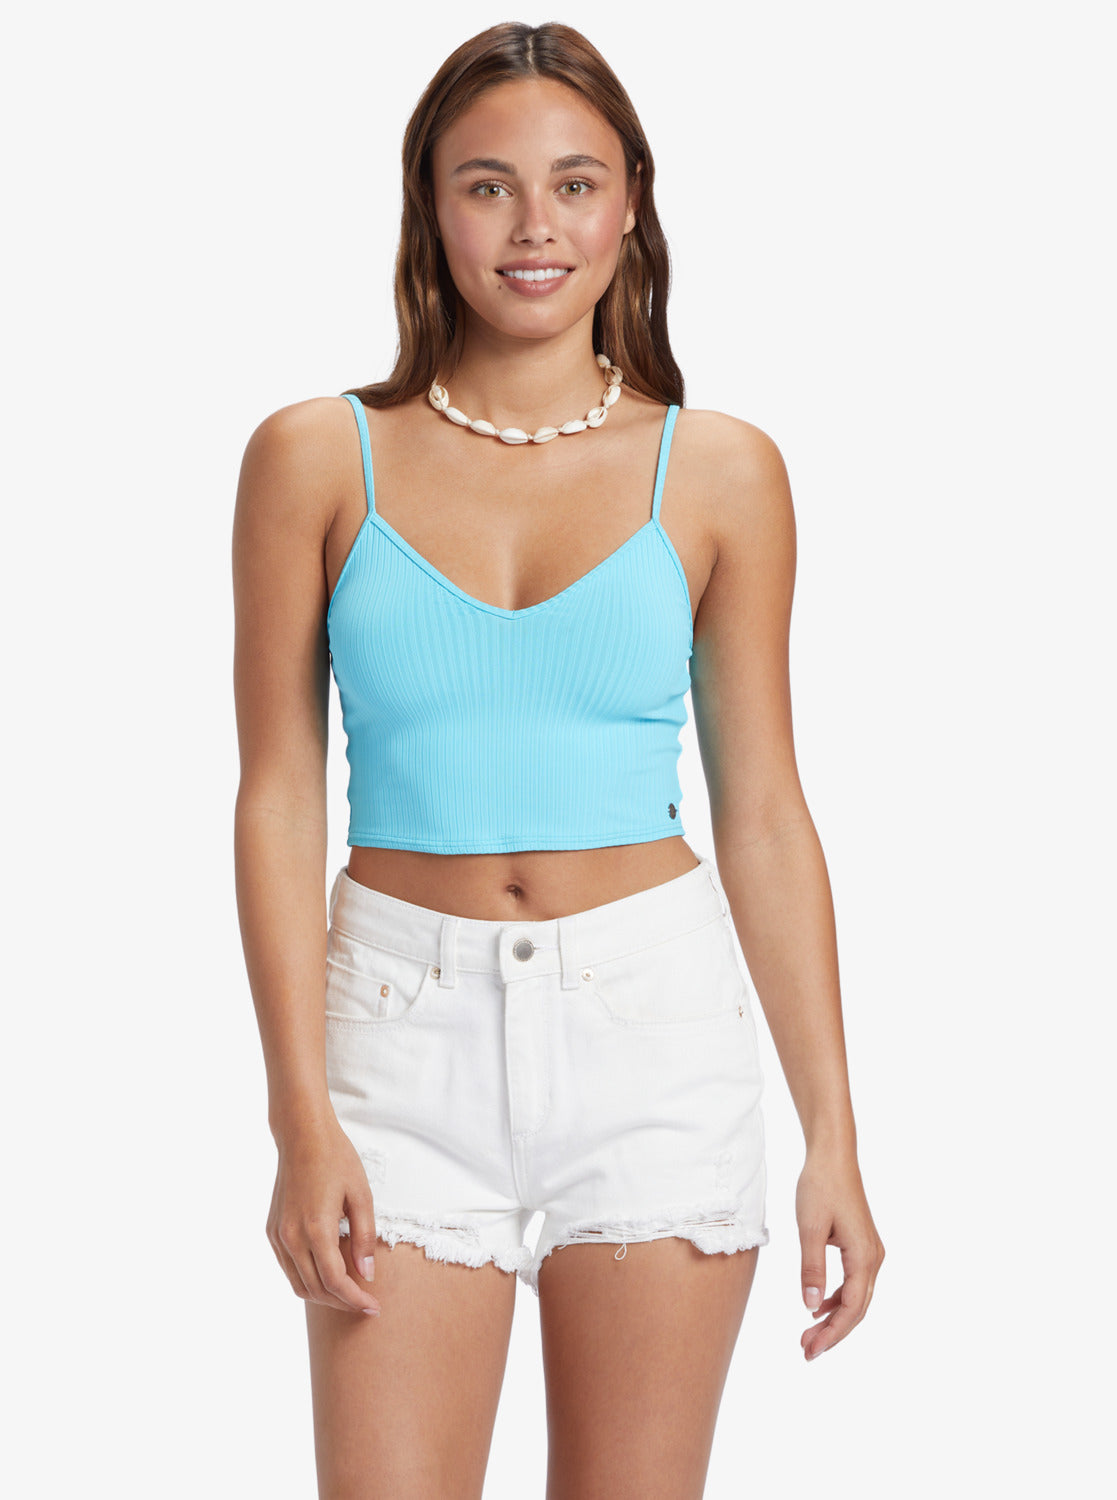 Load image into Gallery viewer, Roxy Brami Strappy Top - Bachelor Button
